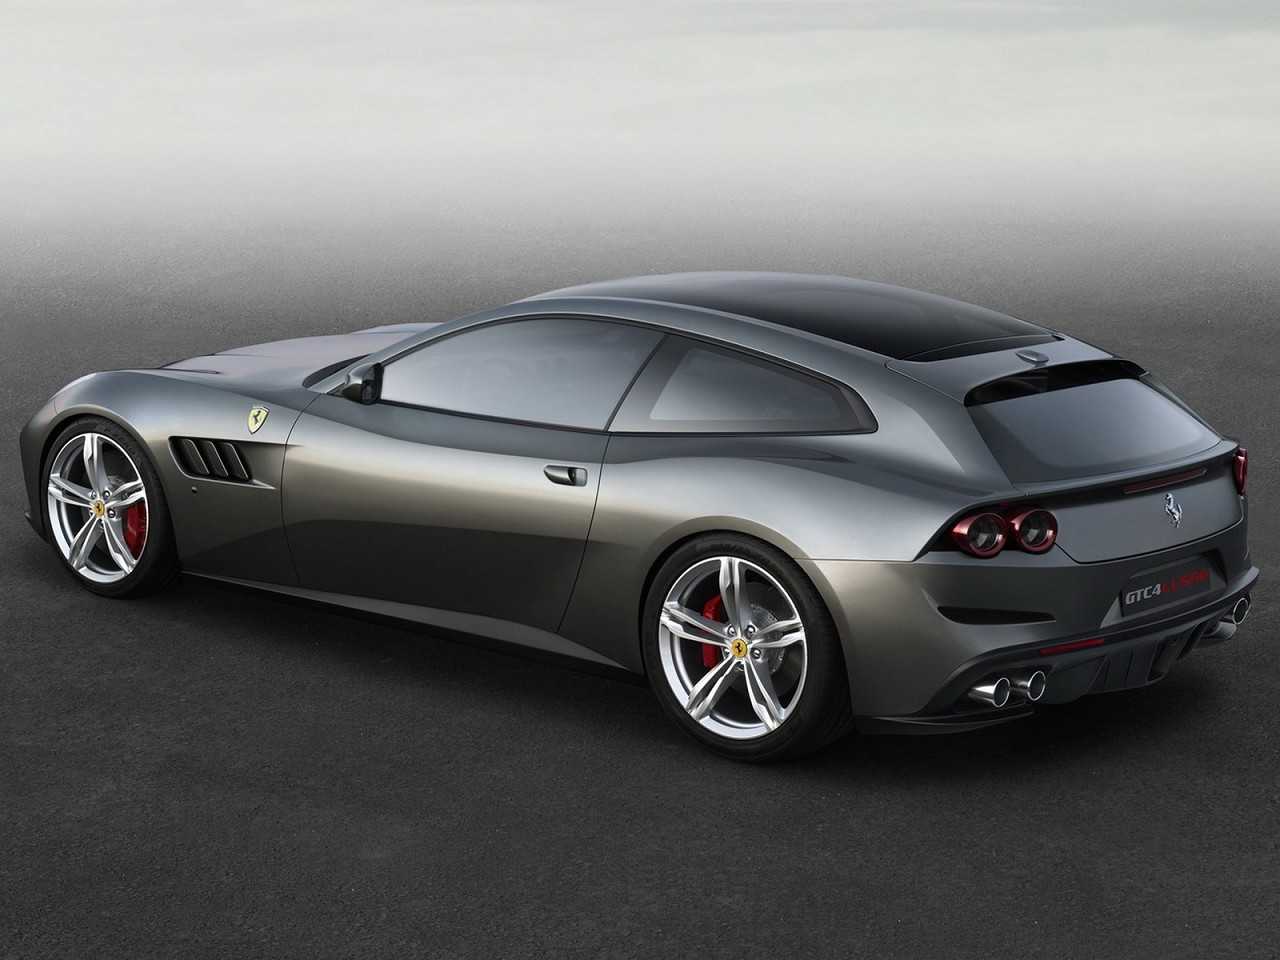 FerrariGTC4Lusso T 2016 - ngulo traseiro